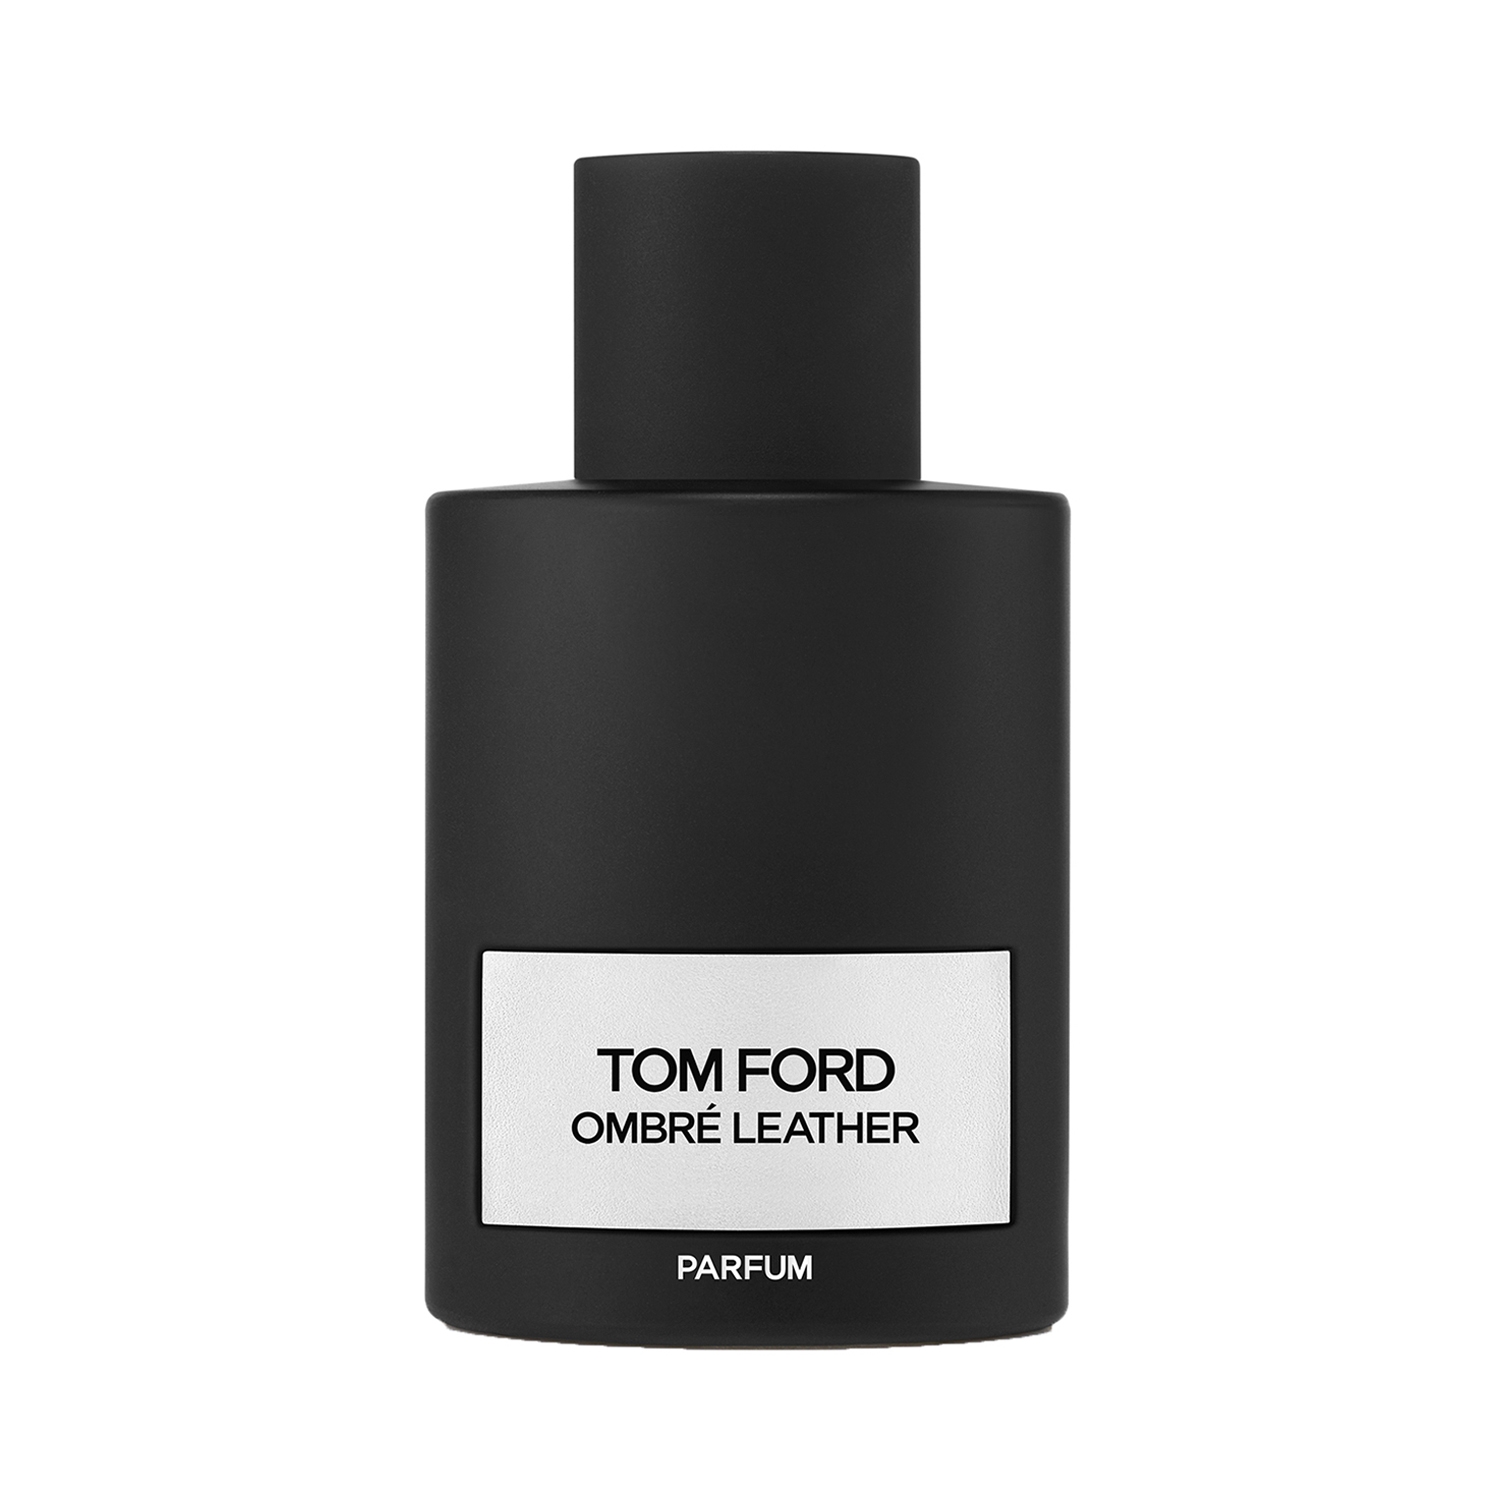 Tom Ford | Tom Ford Ombre Leather Parfum (100ml)